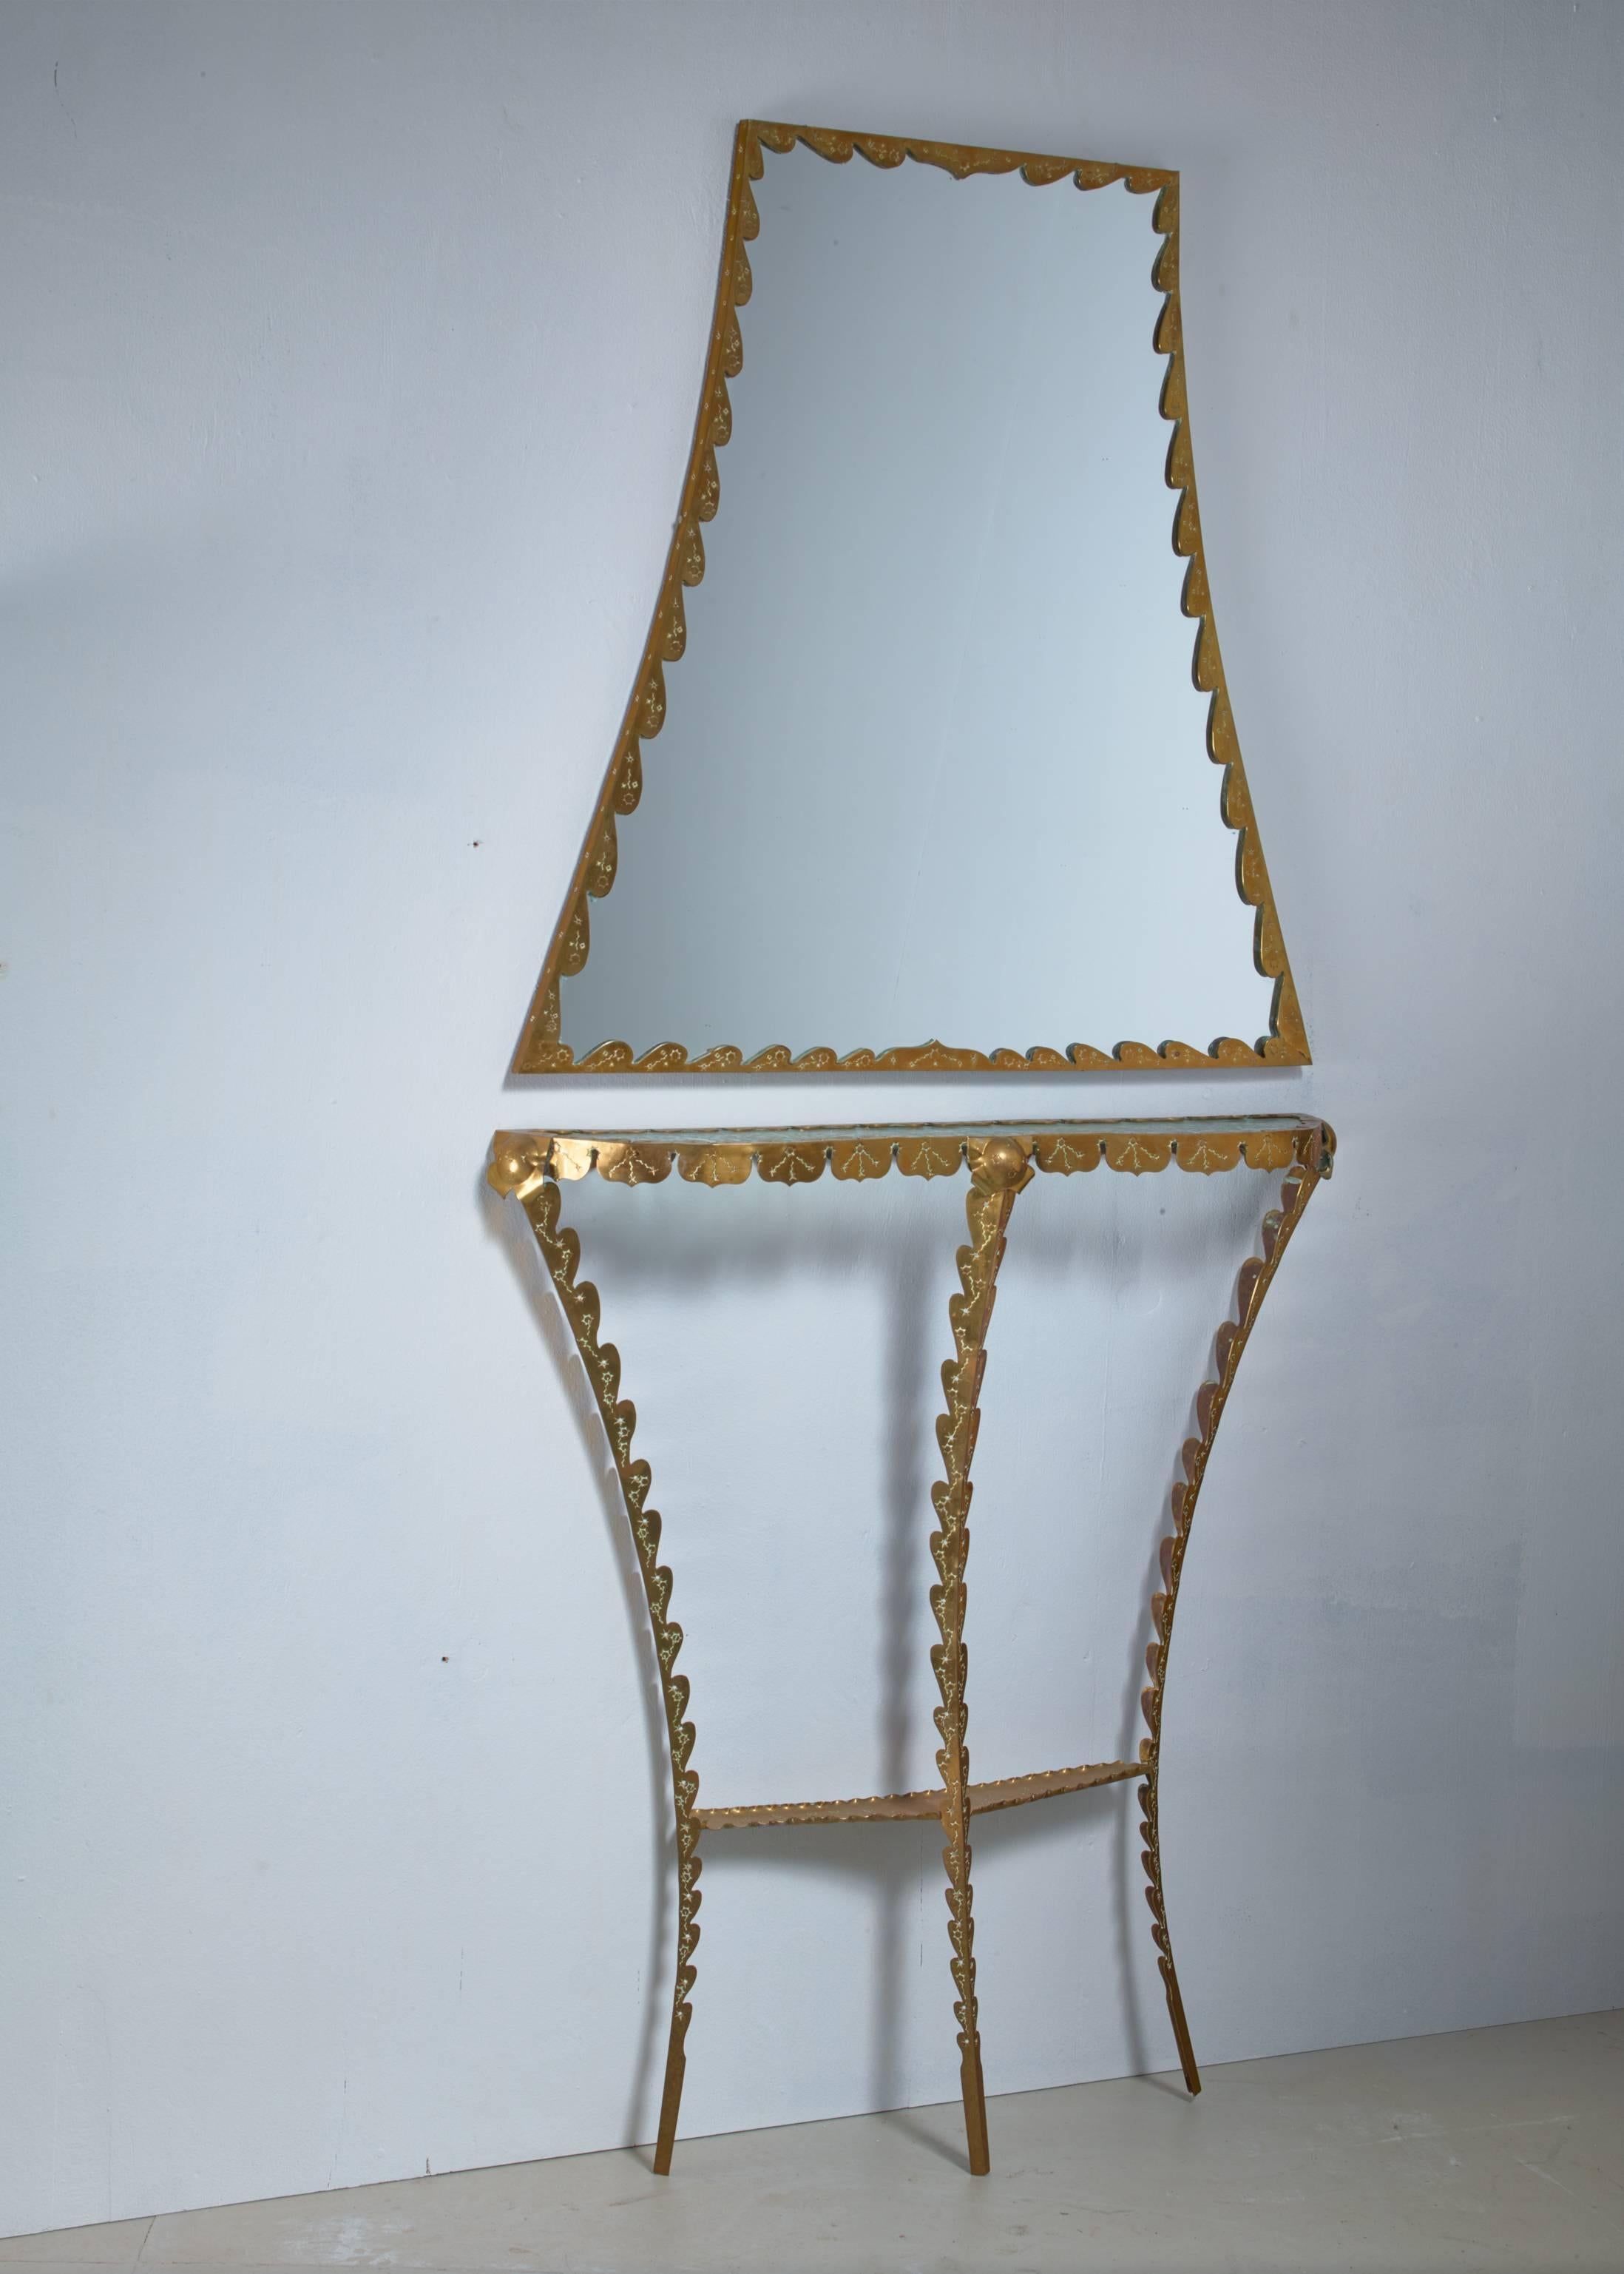 A decorated brass console table with a glass top and standing on three thin legs by brass Art Nouveau console table with wall mirror. It has a matching trapeziod wall mirror. 

Very elegant and rich hall way set.

The mirror is 86 cm (34 inch) high